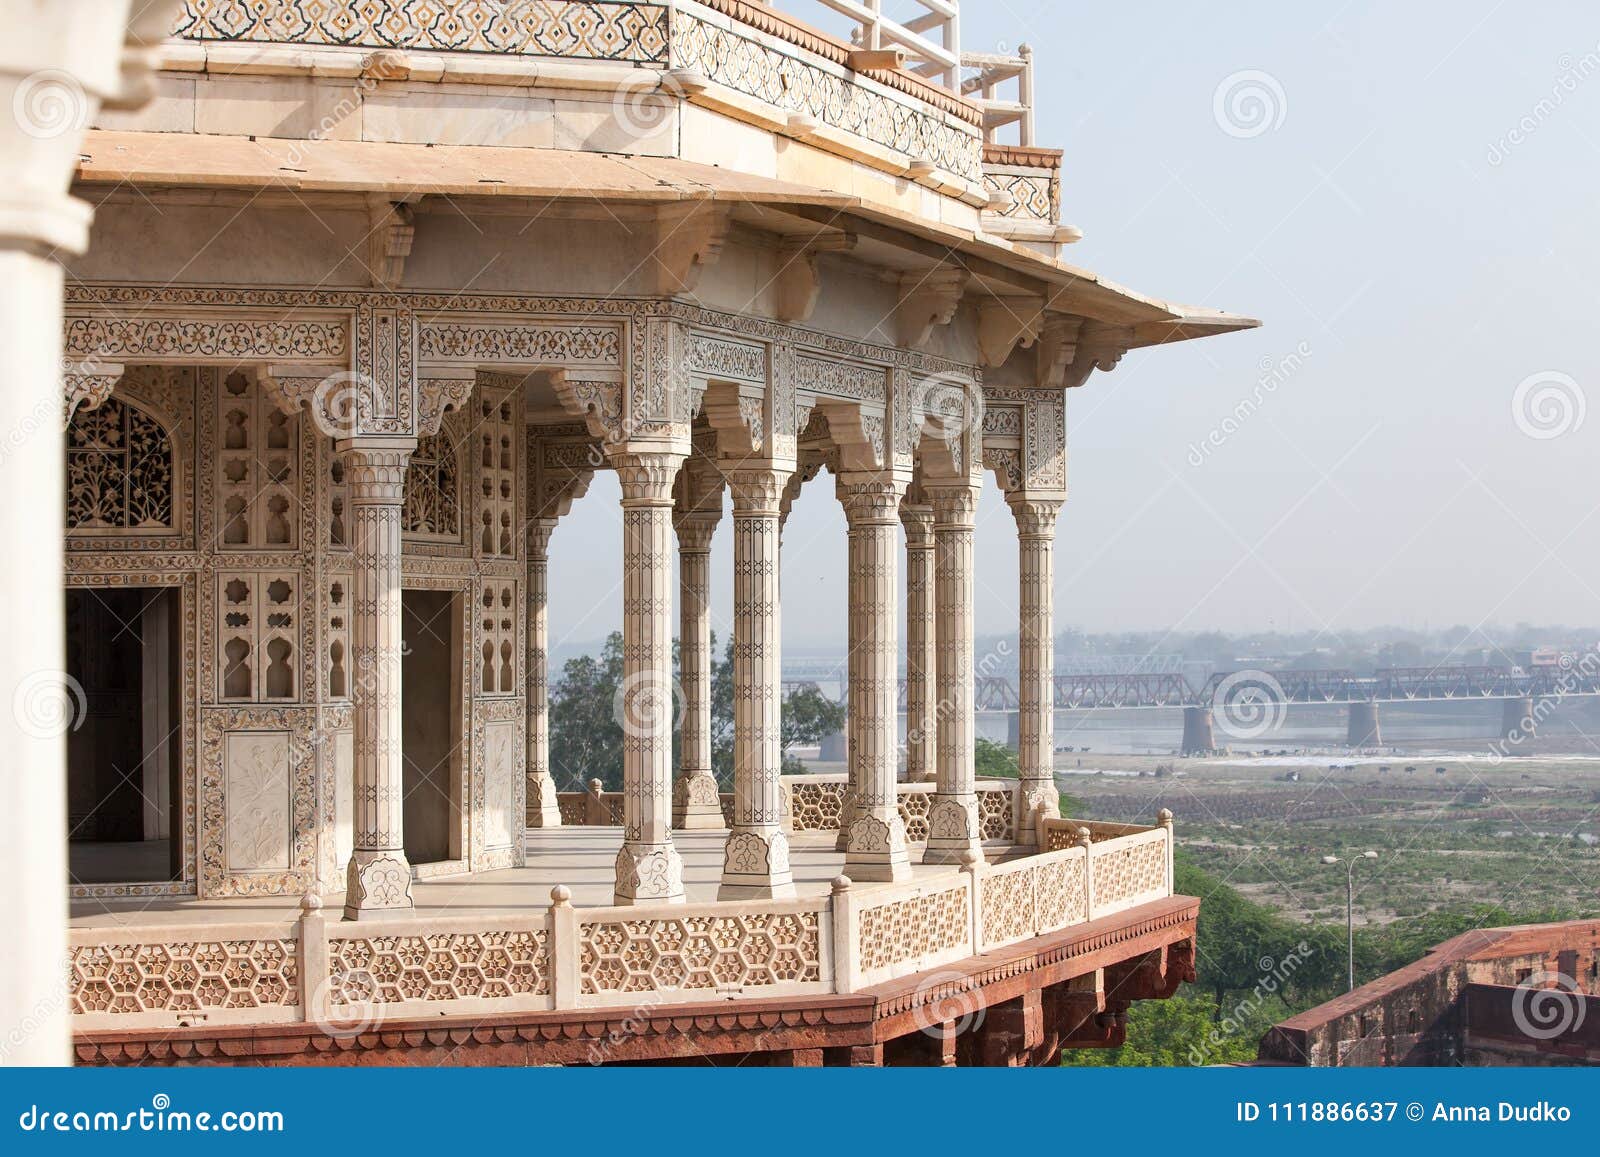 Interior Elements Of The Red Fort In Agra India Stock Image